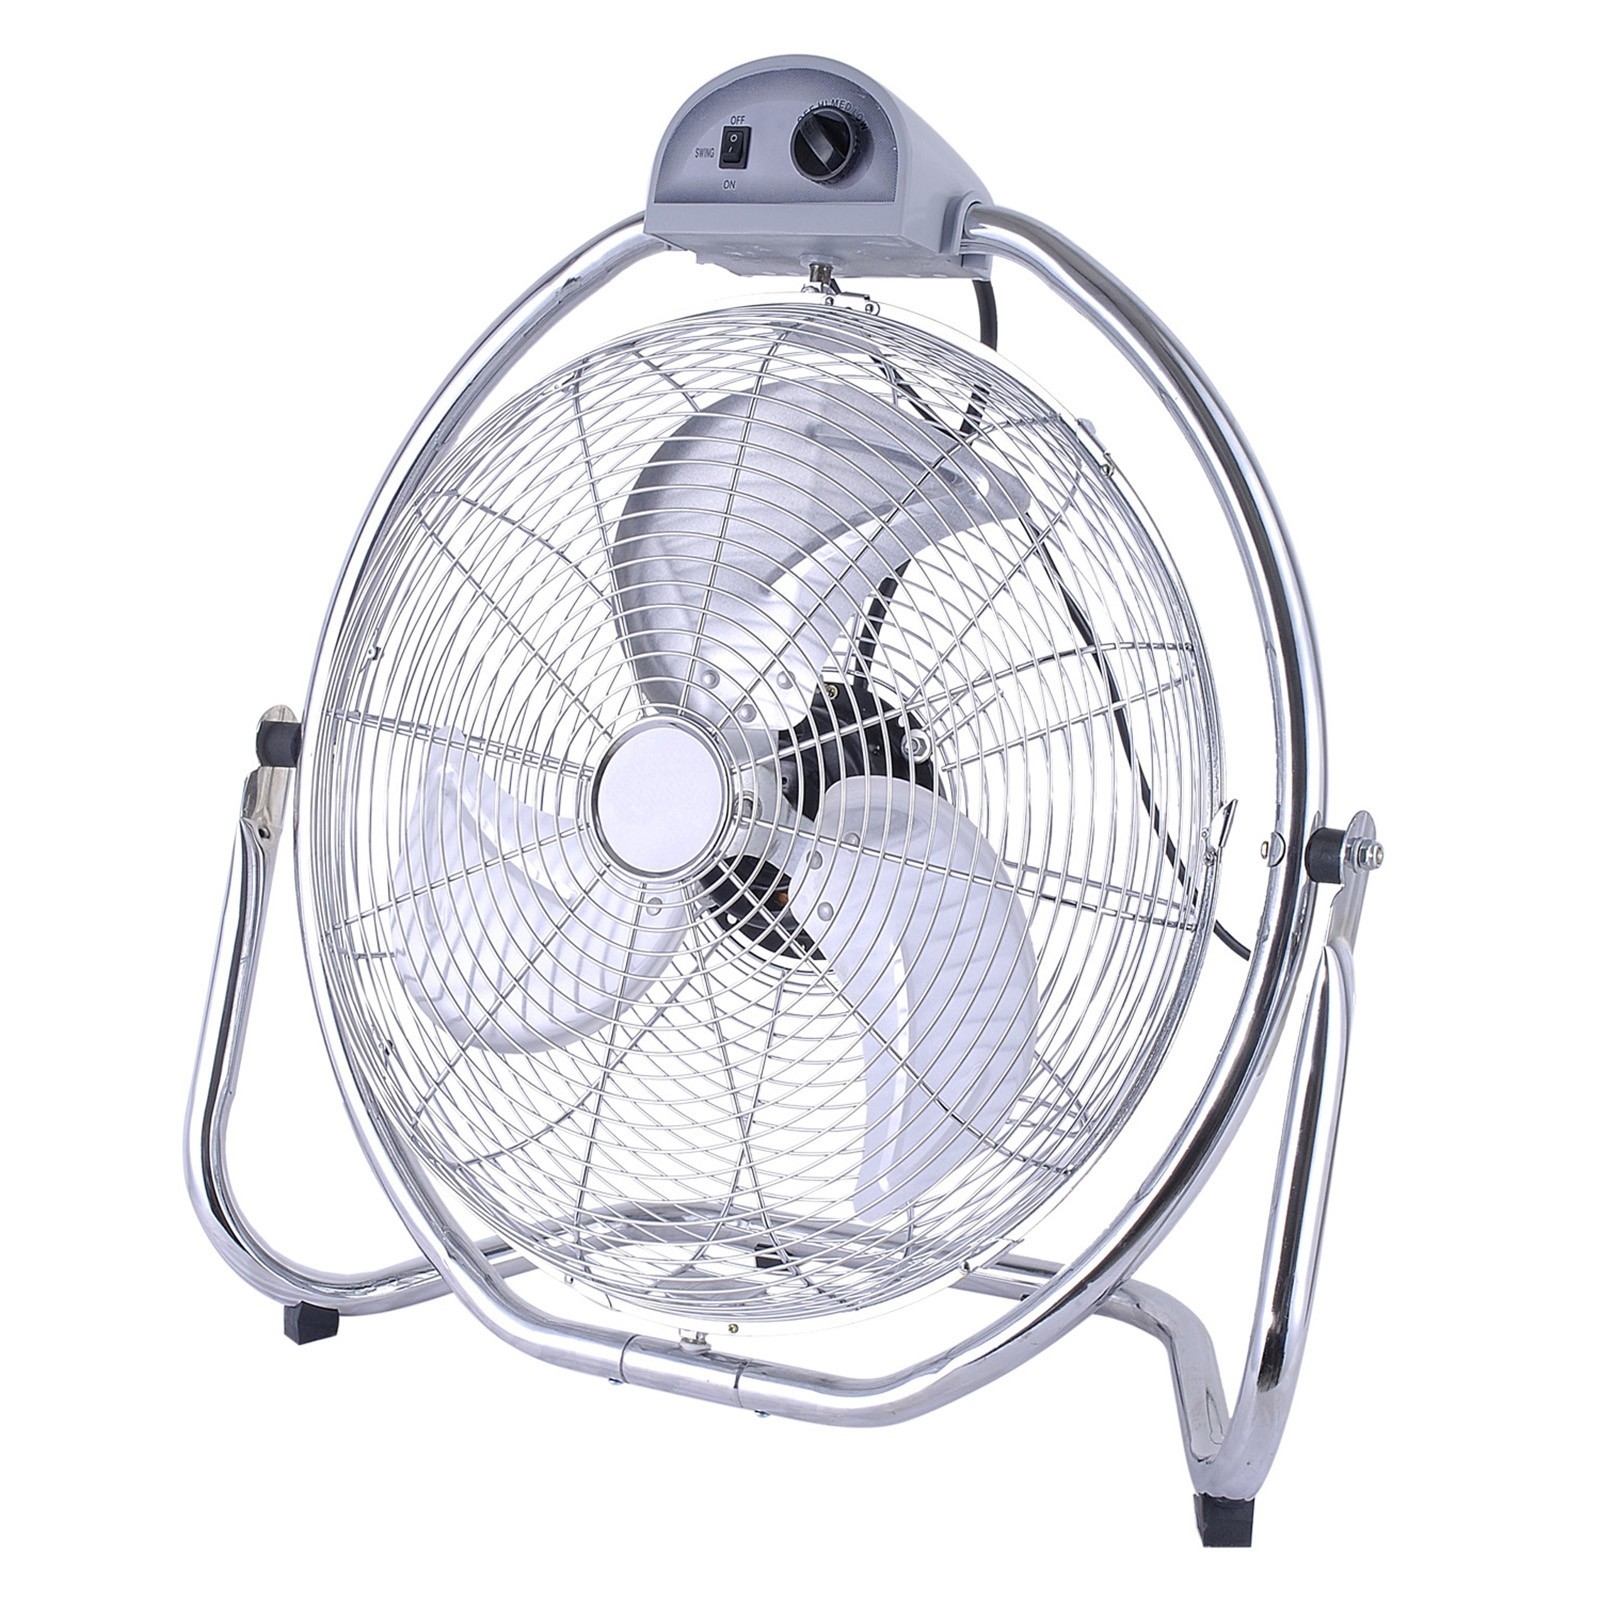 OPTIMUS F4208 INDUSTRIAL 20INCH HIGH VELOCITY FAN WITH CHROME